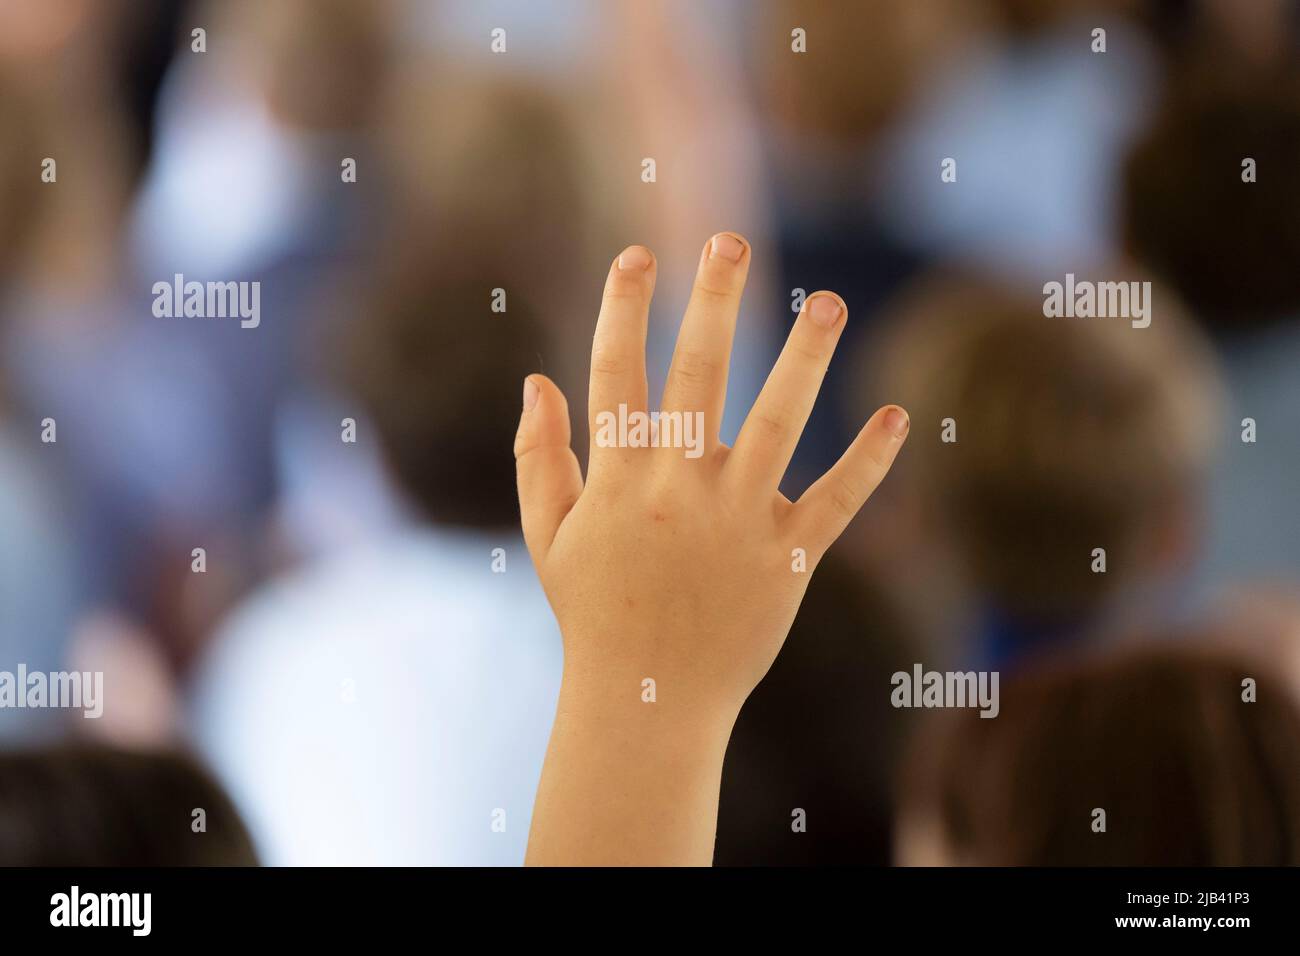 A child raises their hand in the air during a lesson in a school classroom. Stock Photo